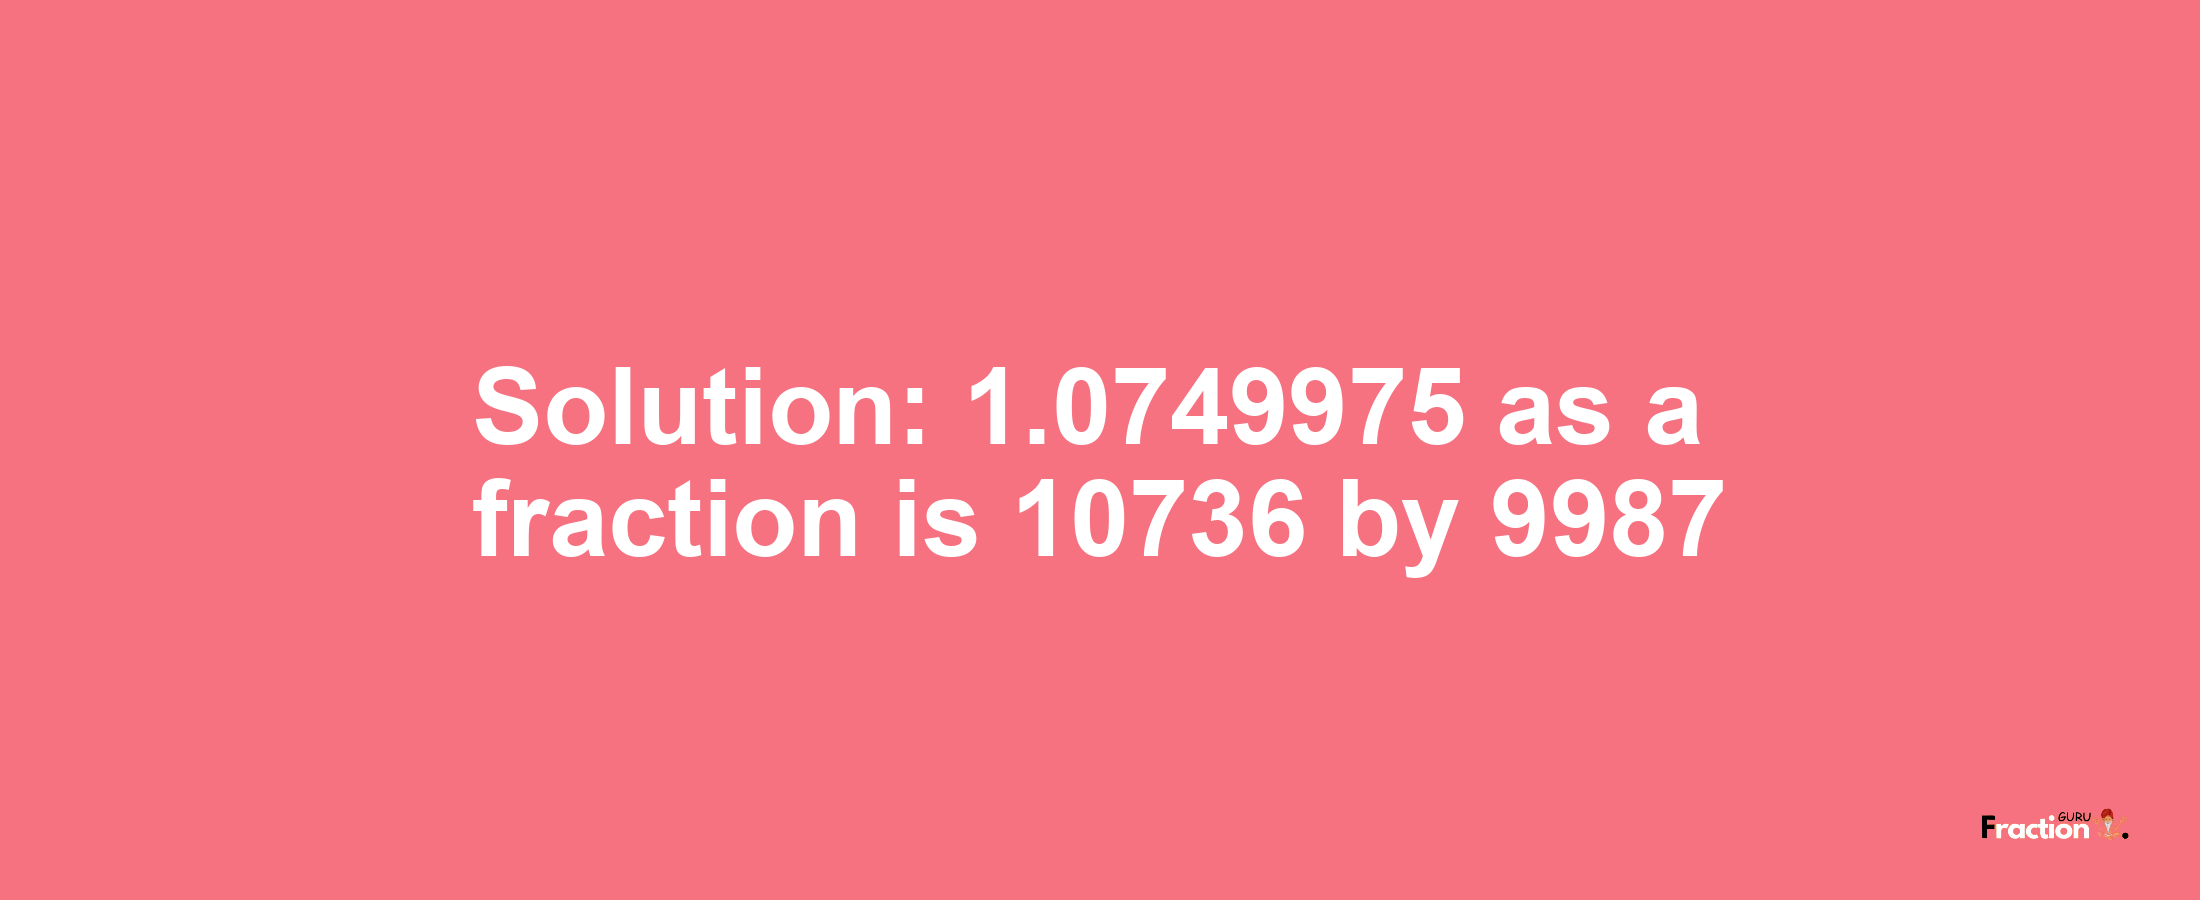 Solution:1.0749975 as a fraction is 10736/9987